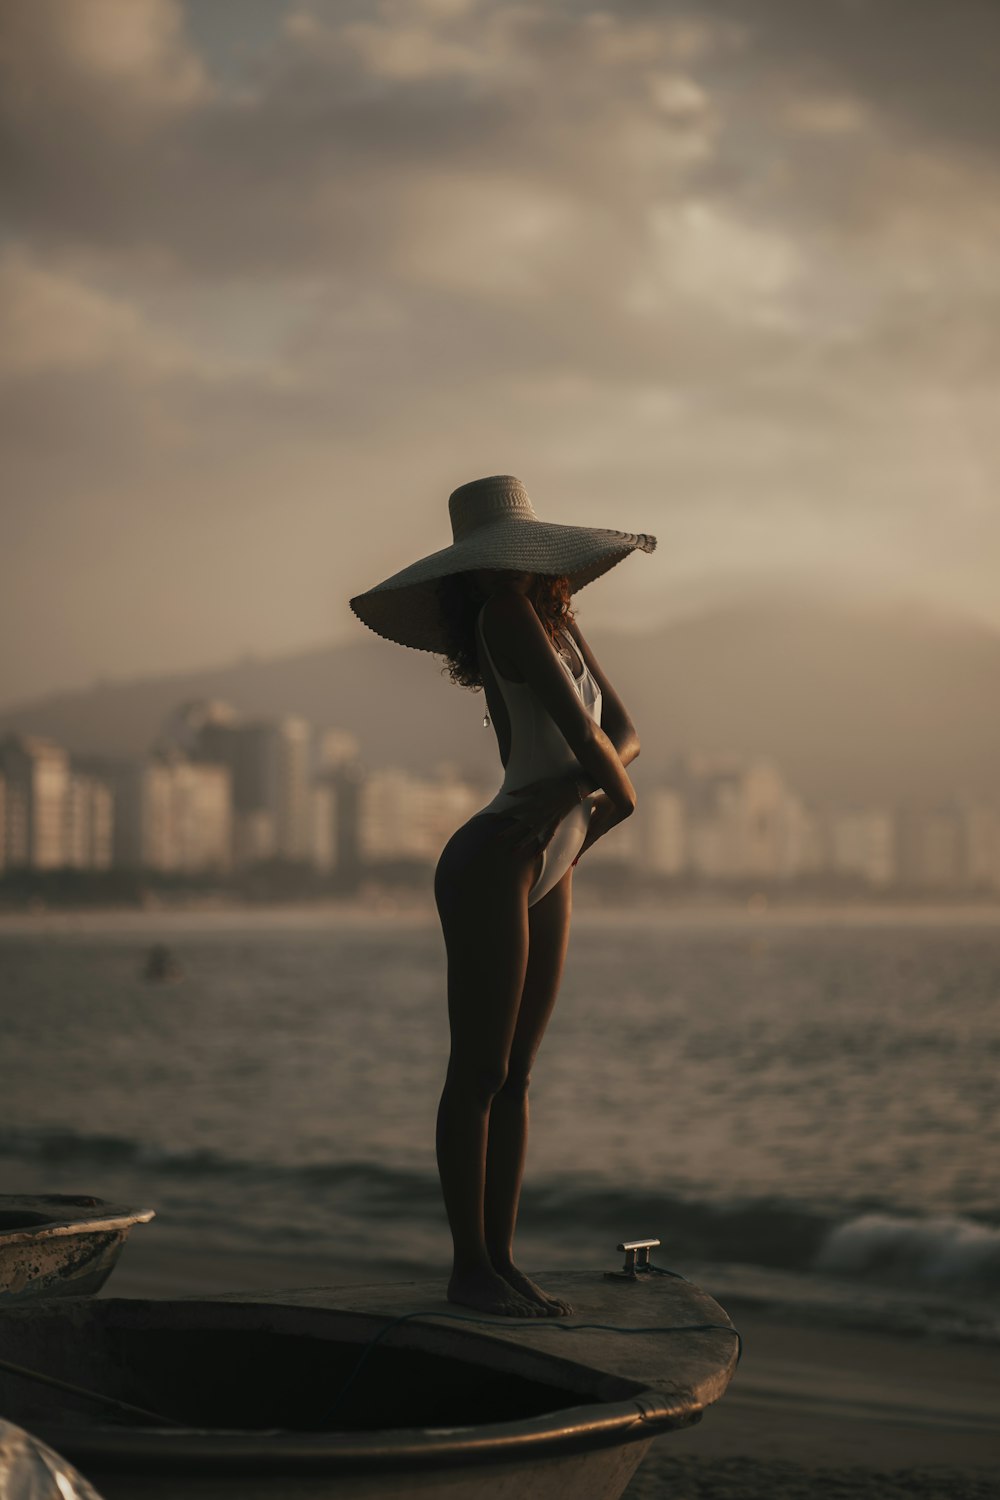 a person in a hat and dress standing on a boat in the water